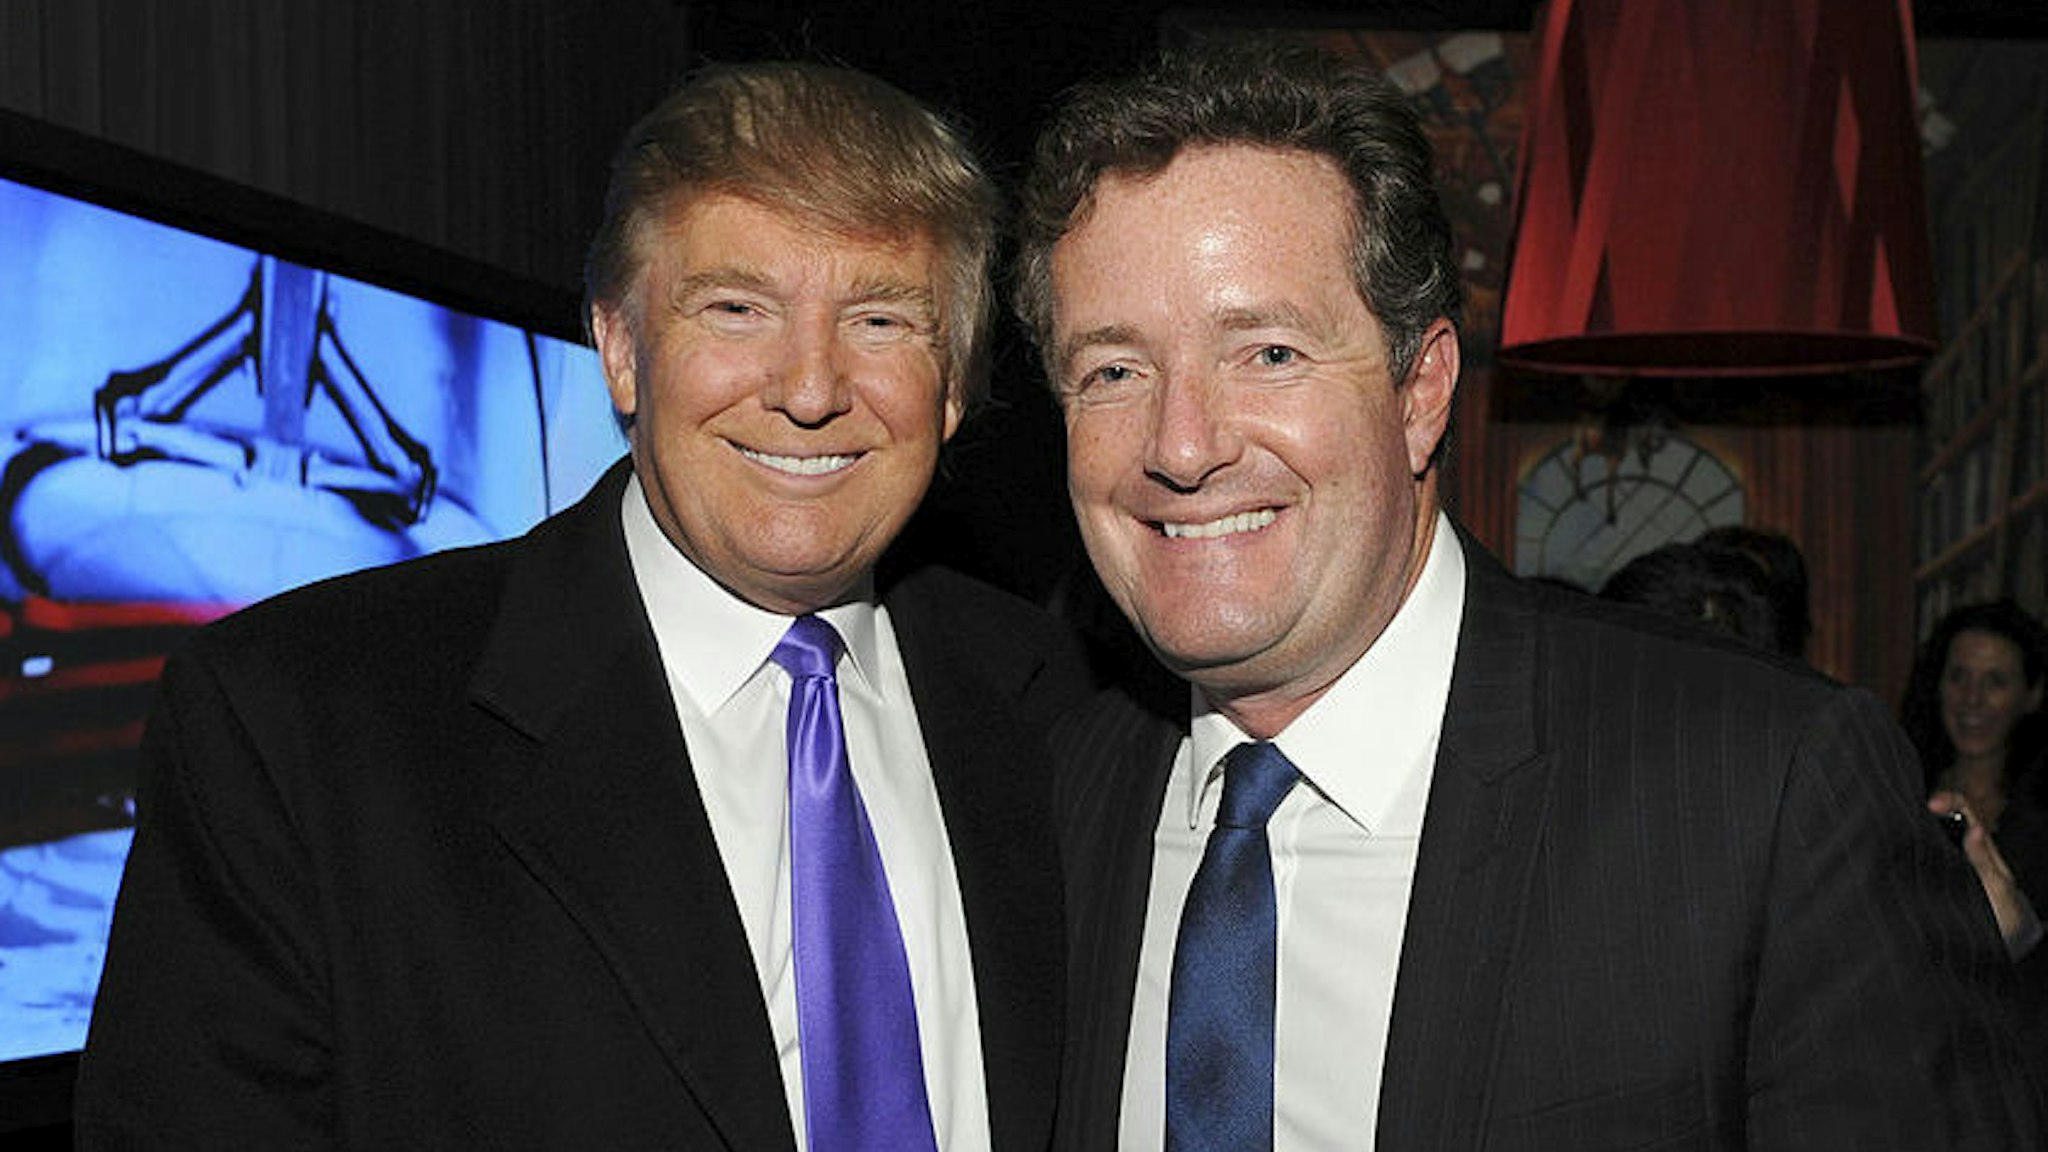 Television Personality Donald Trump and journalist Piers Morgan attend the celebration of Perfumania and Kim Kardashian�s appearance on NBC�s "The Apprentice" at the Provocateur at The Hotel Gansevoort on November 10, 2010 in New York, New York. (Photo by Mathew Imaging/WireImage)